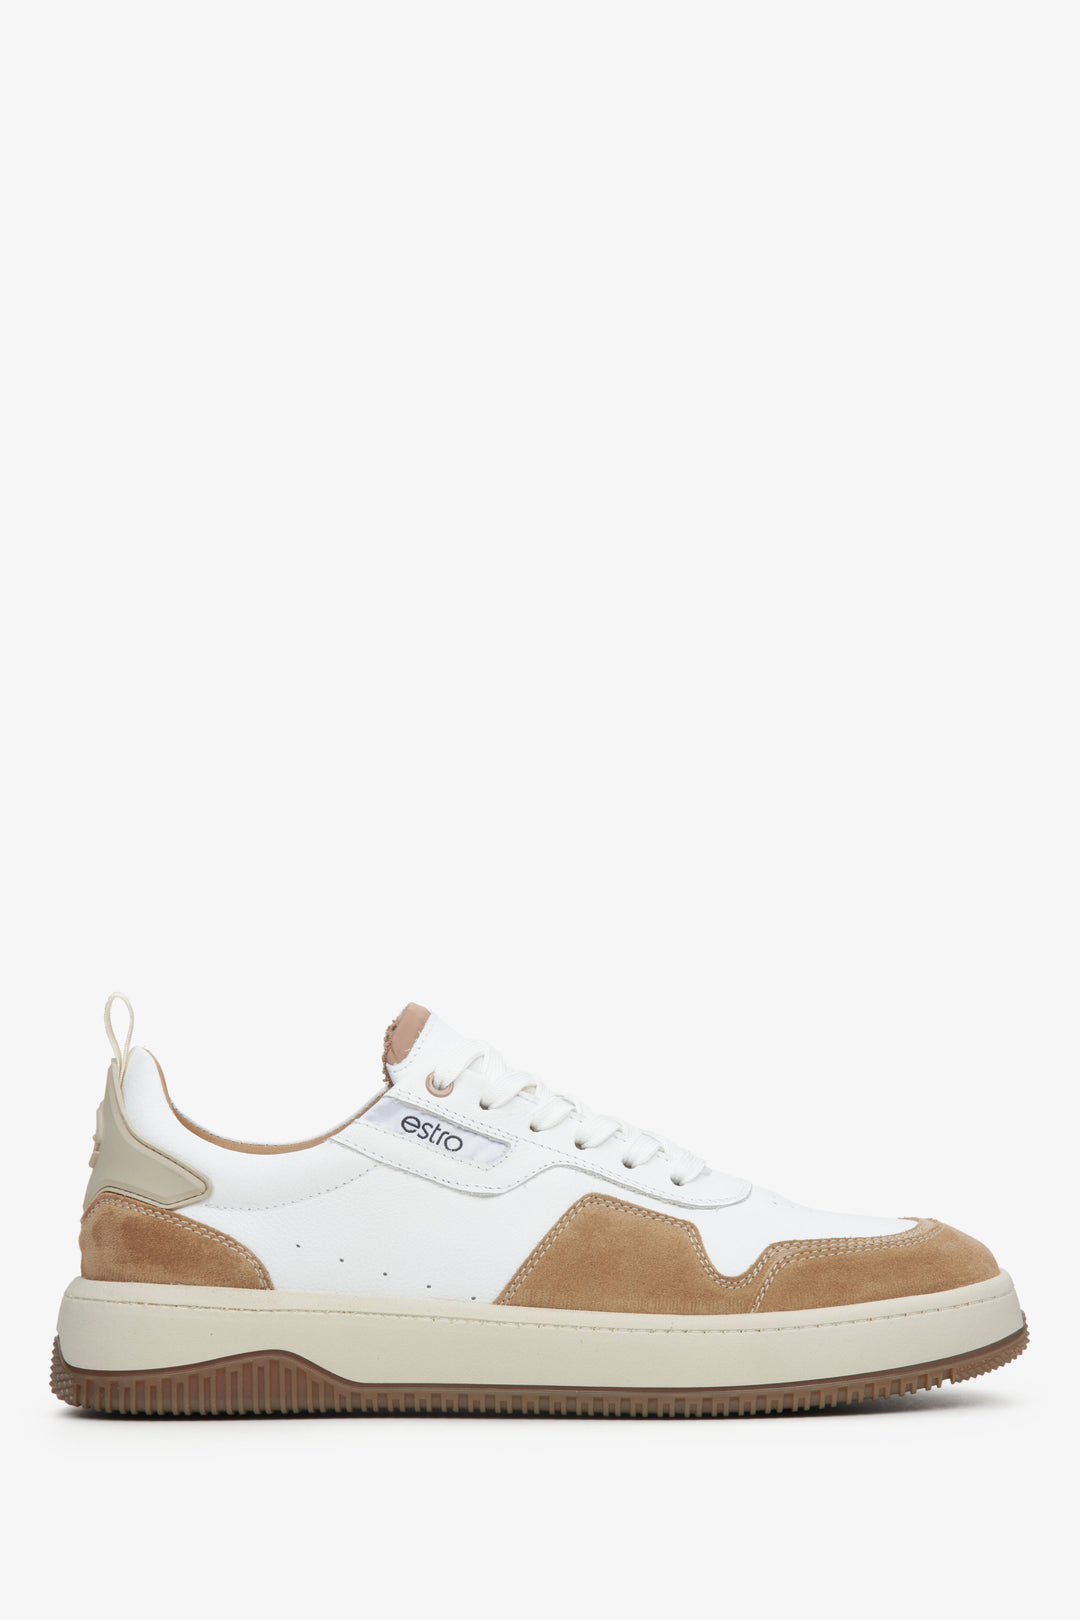 Men's White & Brown Lace-up Sneakers with a Flexible Sole Estro ER00114677.